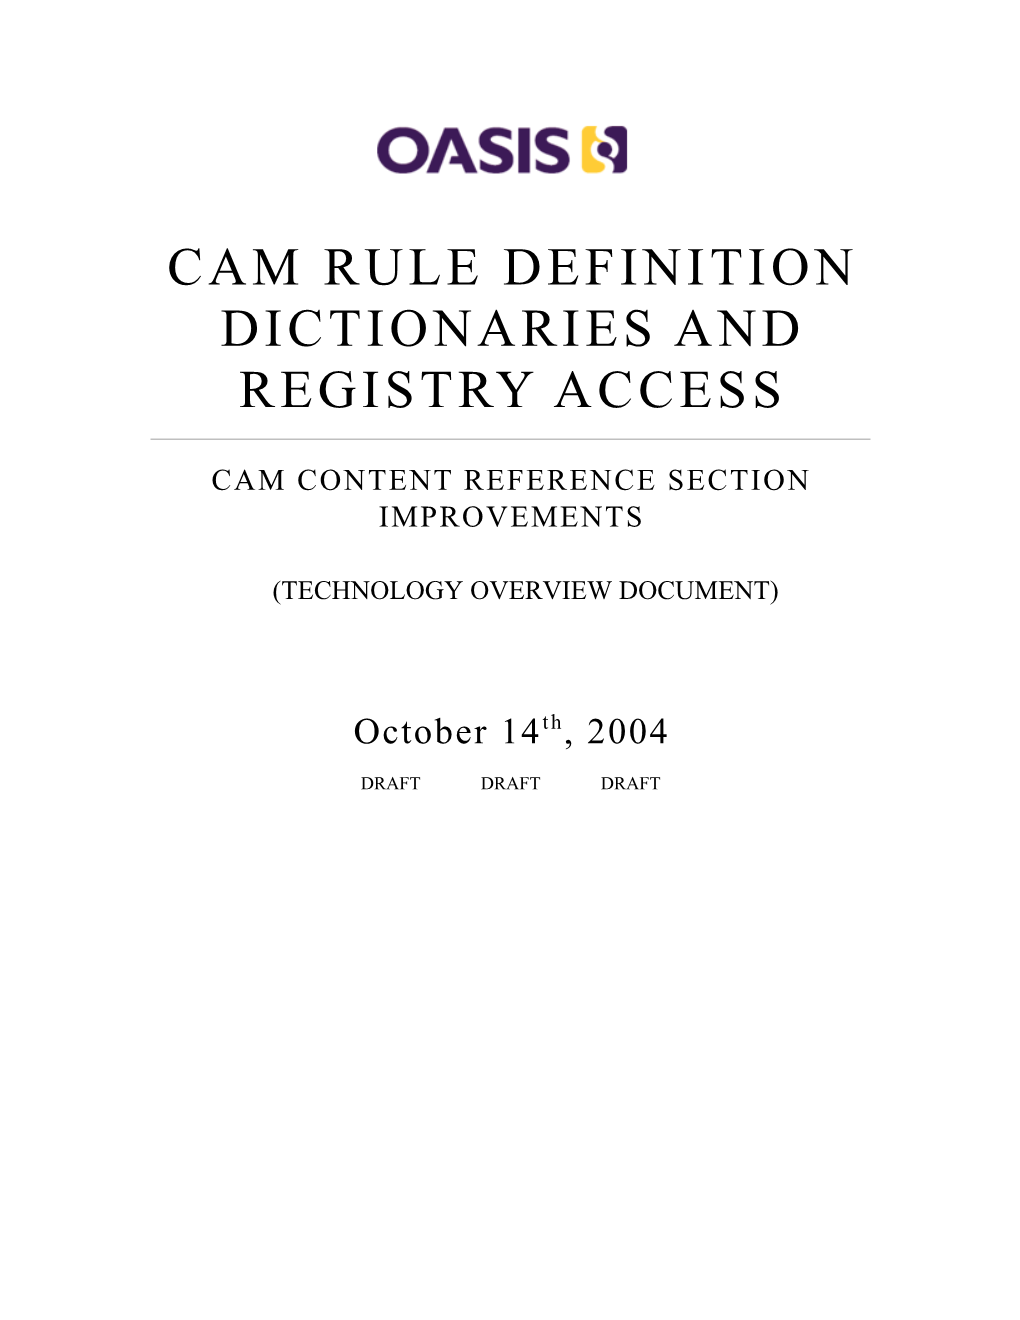 CAM Rule Definition Dictionaries and Registry Access